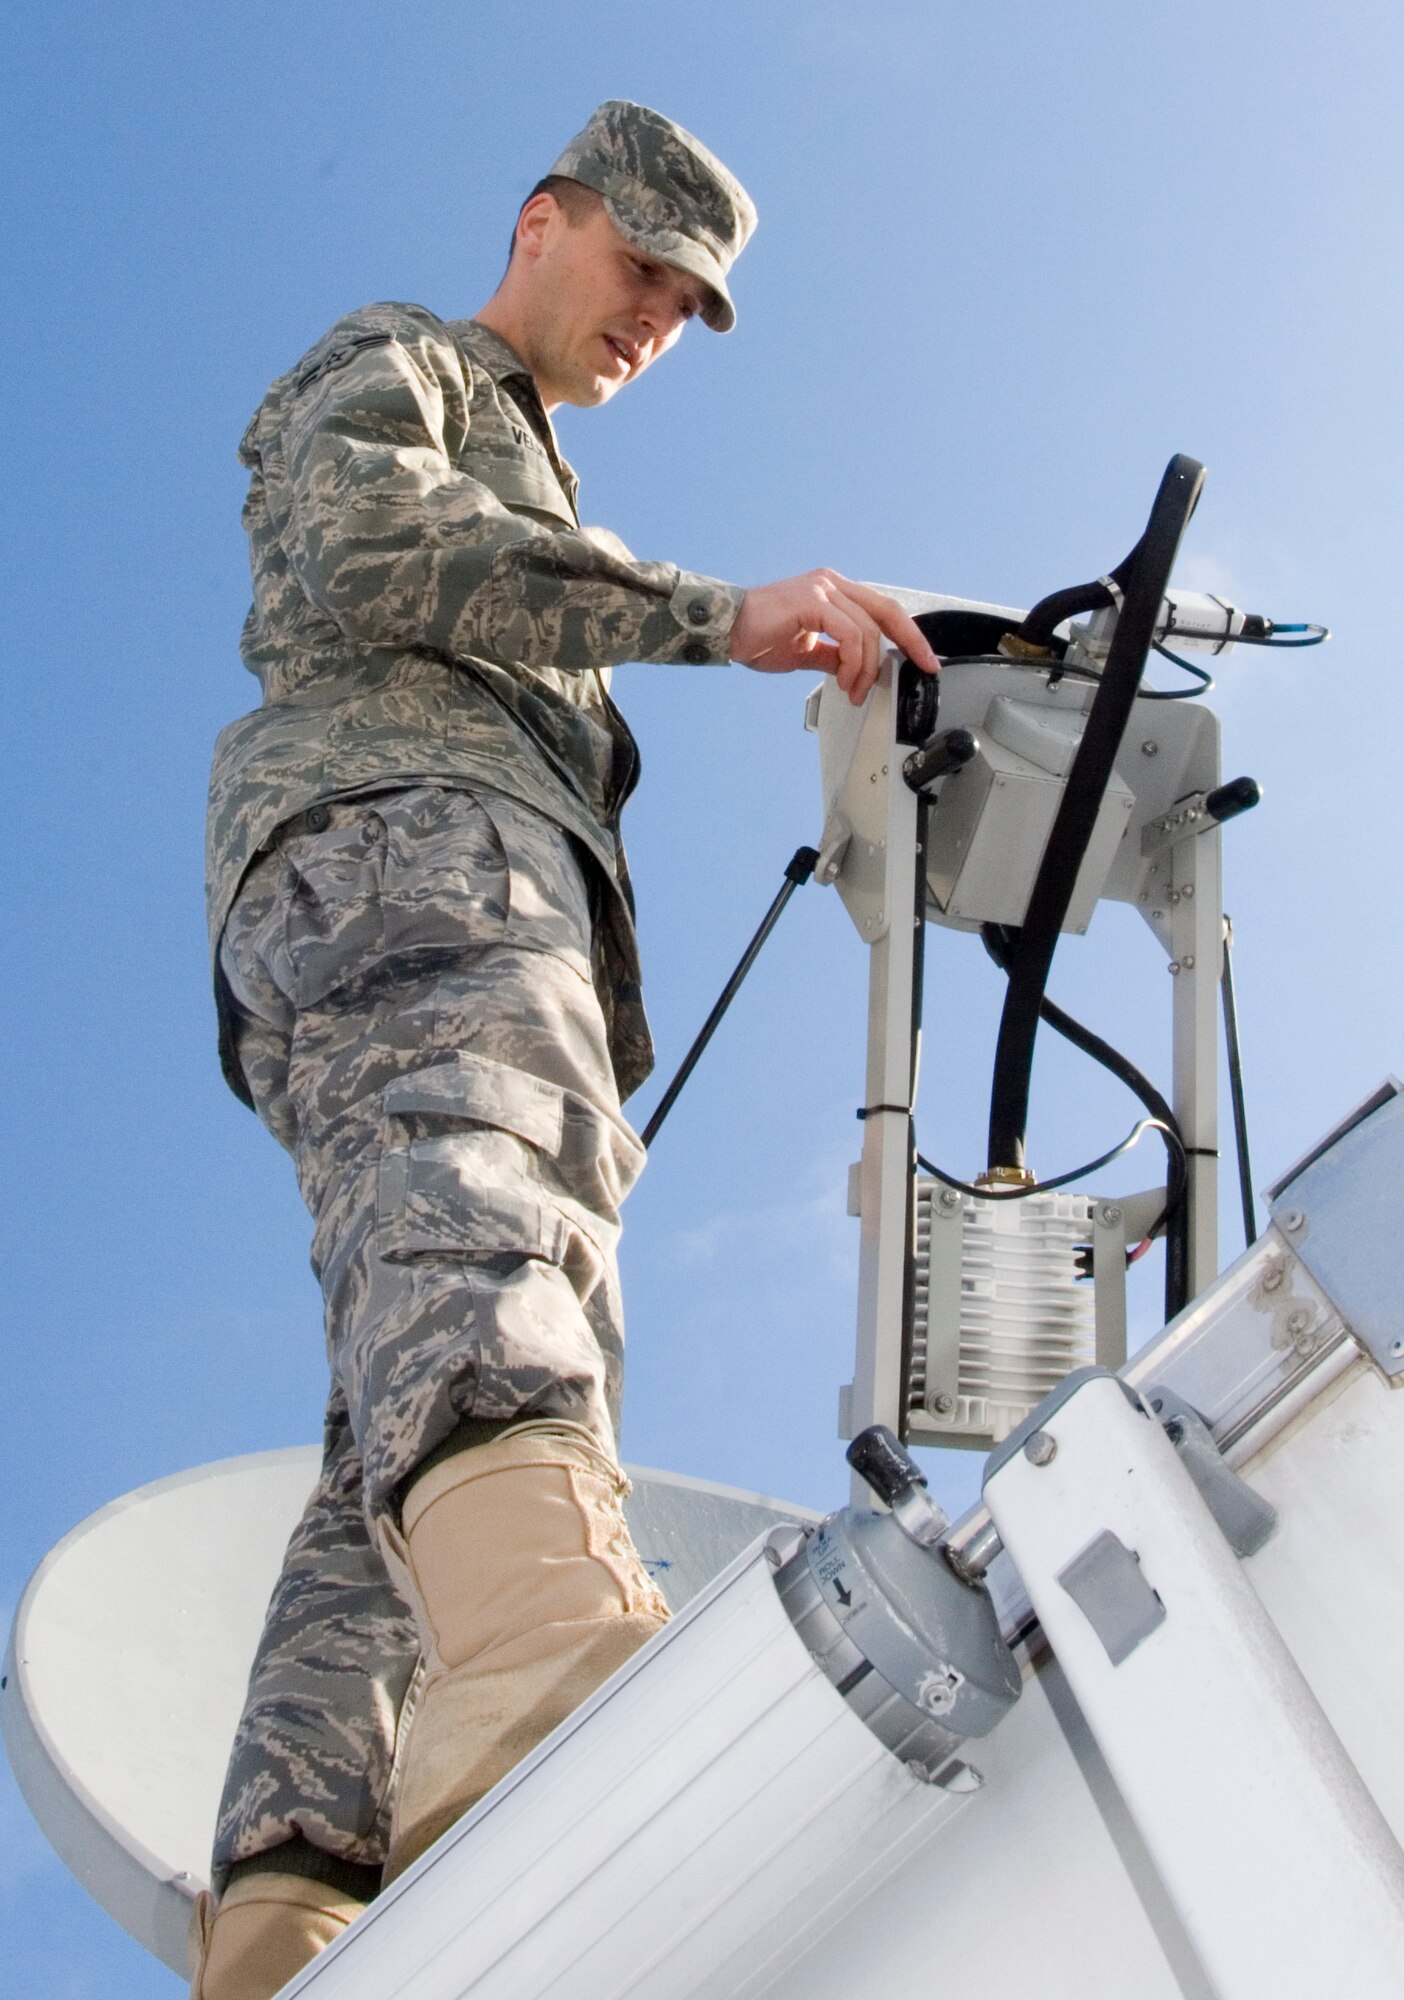 29 March 2009
Airman 1st Class Sanel Velic 133rd Communications Flight, Minnesota Air National Guard, checks the dish on a state wide military communication system near Moorhead, Minnesota. The Joint Communications Platform (JCP) allows both Army National Guard and Air National Guard members to communicate live with information about 2009 spring flooding. Airman 1st Class Velic?s hometown is St Paul, MN. 
U.S. Air Force Photo by Tech Sgt Erik Gudmundson (Released)

